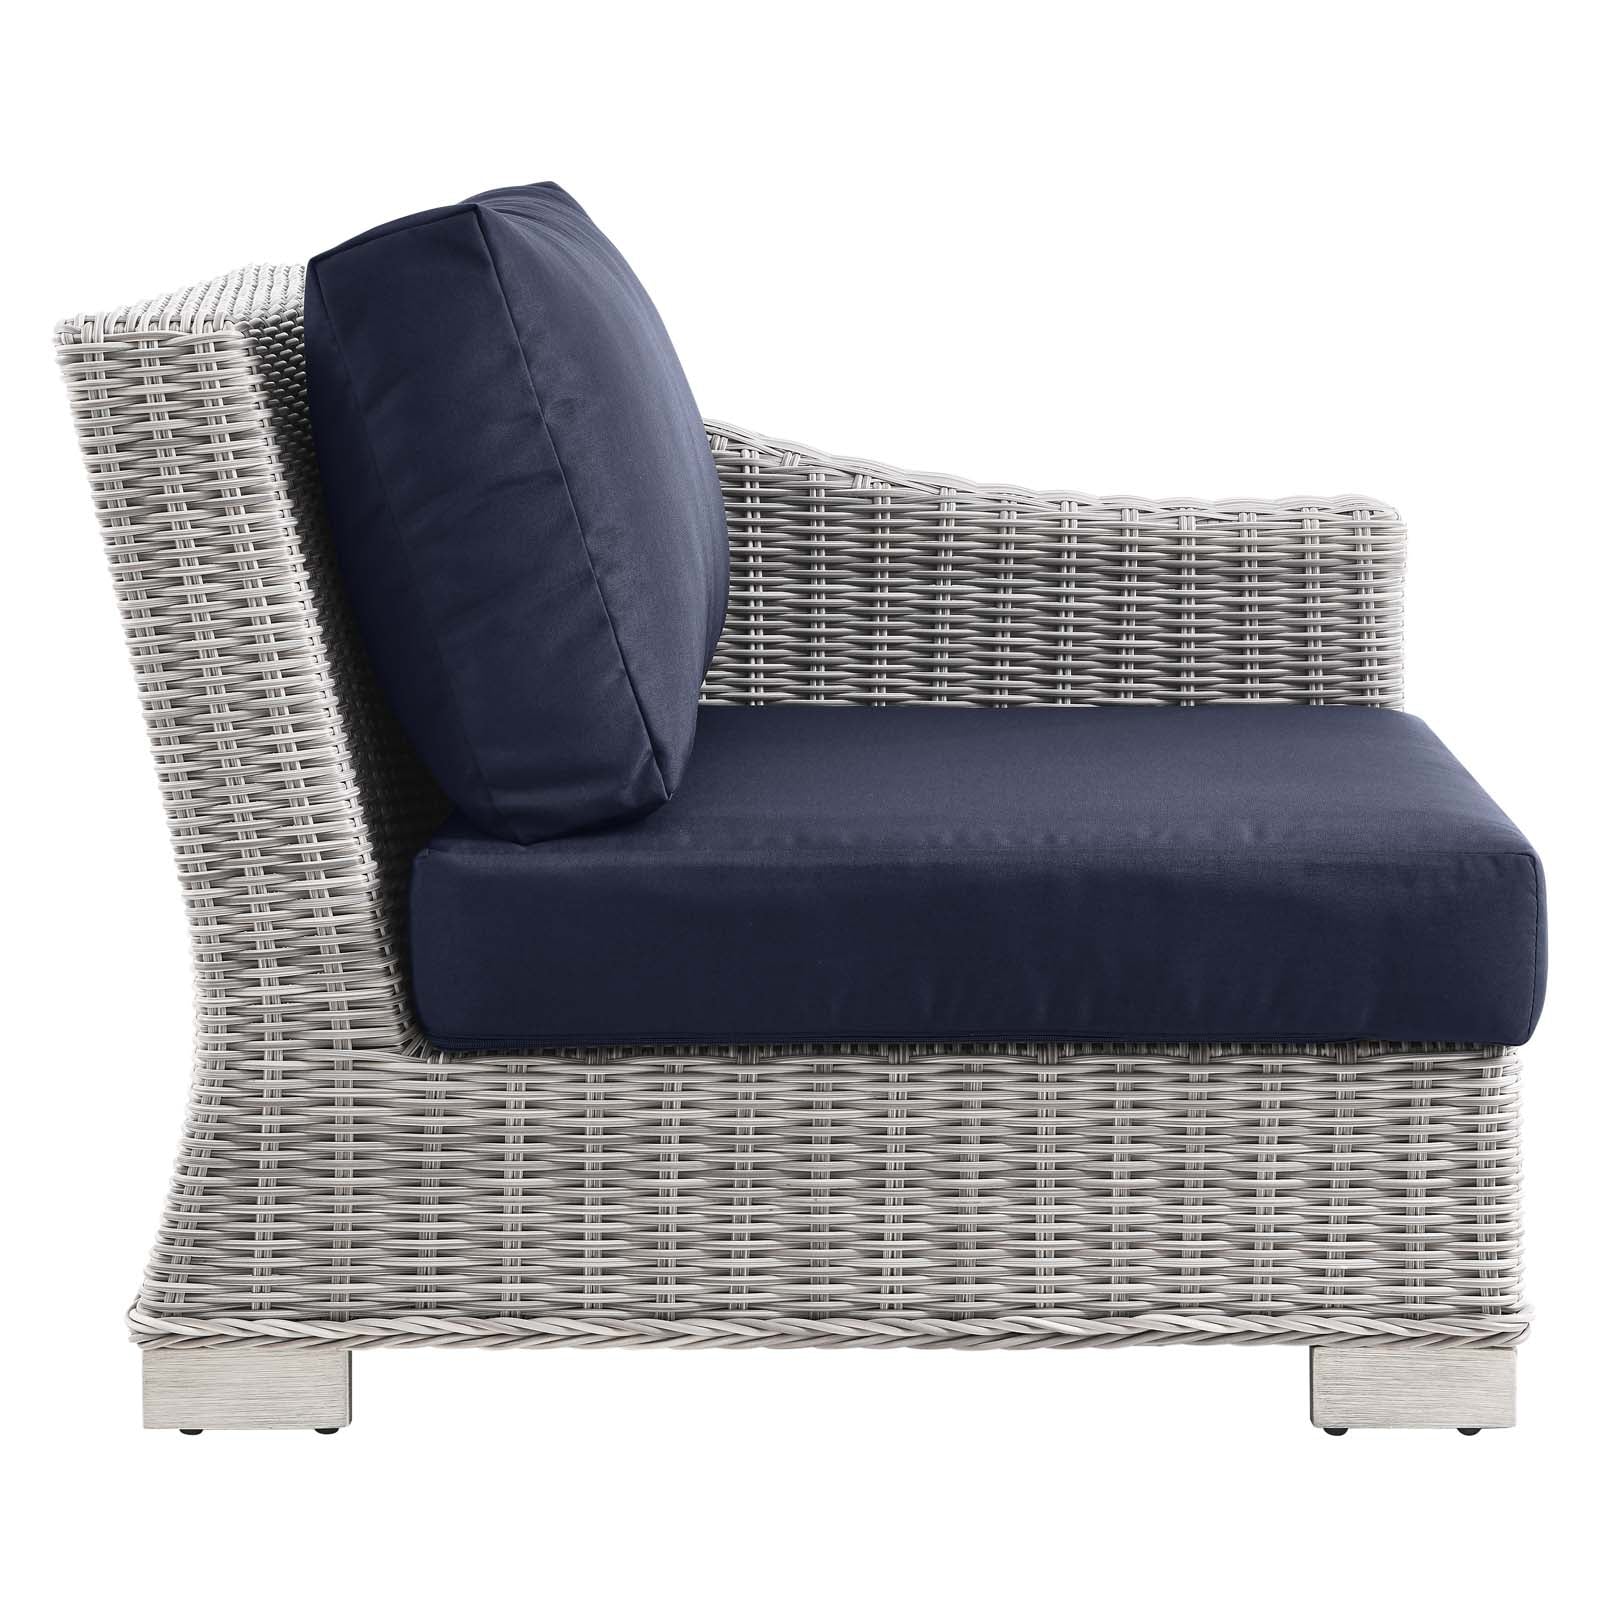 Conway Outdoor Patio Wicker Rattan Right-Arm Chair